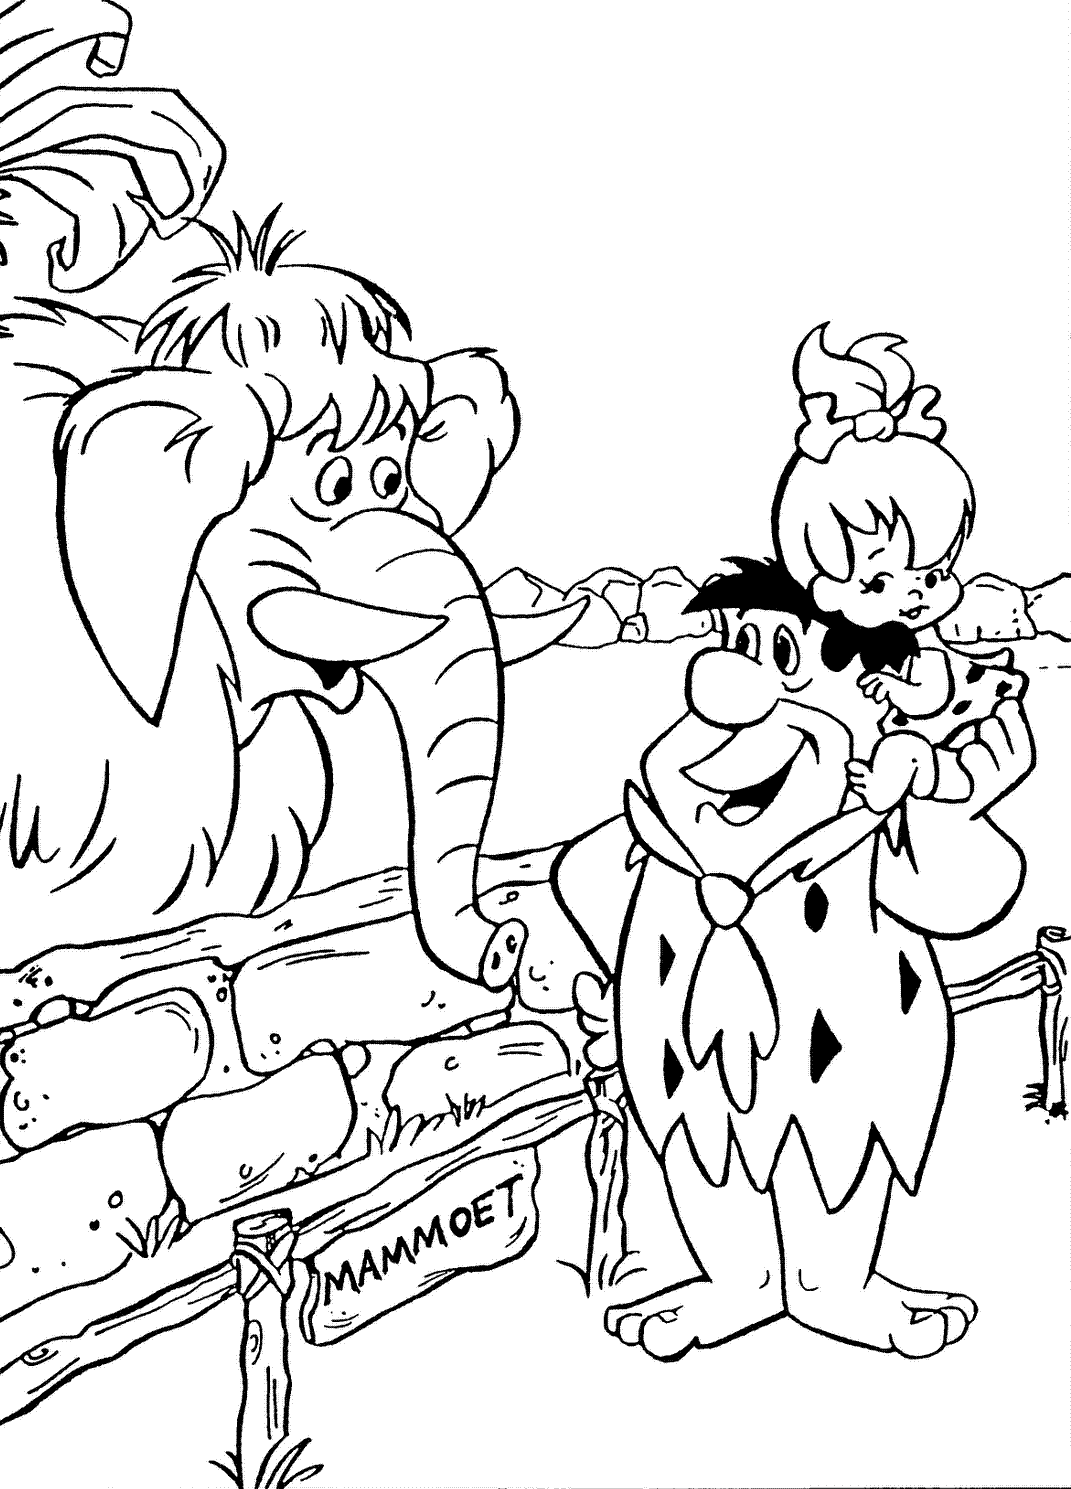 colouring book pages to print flintstones coloring pages print colouring pages to book 